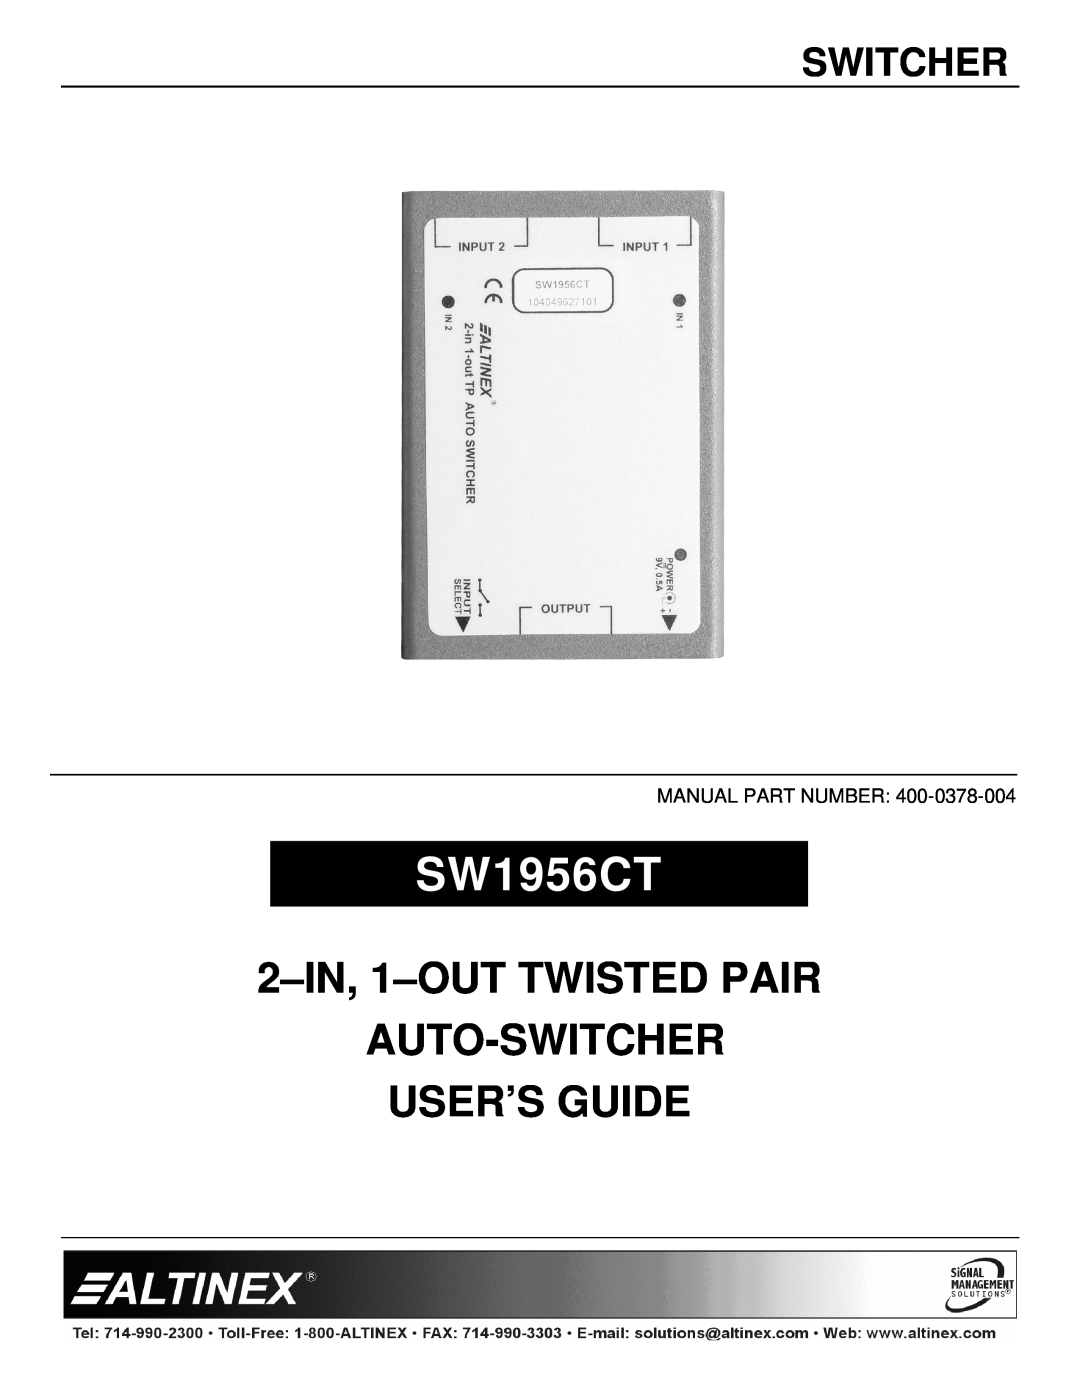 Altinex SW1956CT manual Switcher, 2-IN, 1-OUT TWISTED PAIR AUTO-SWITCHER USER’S GUIDE 